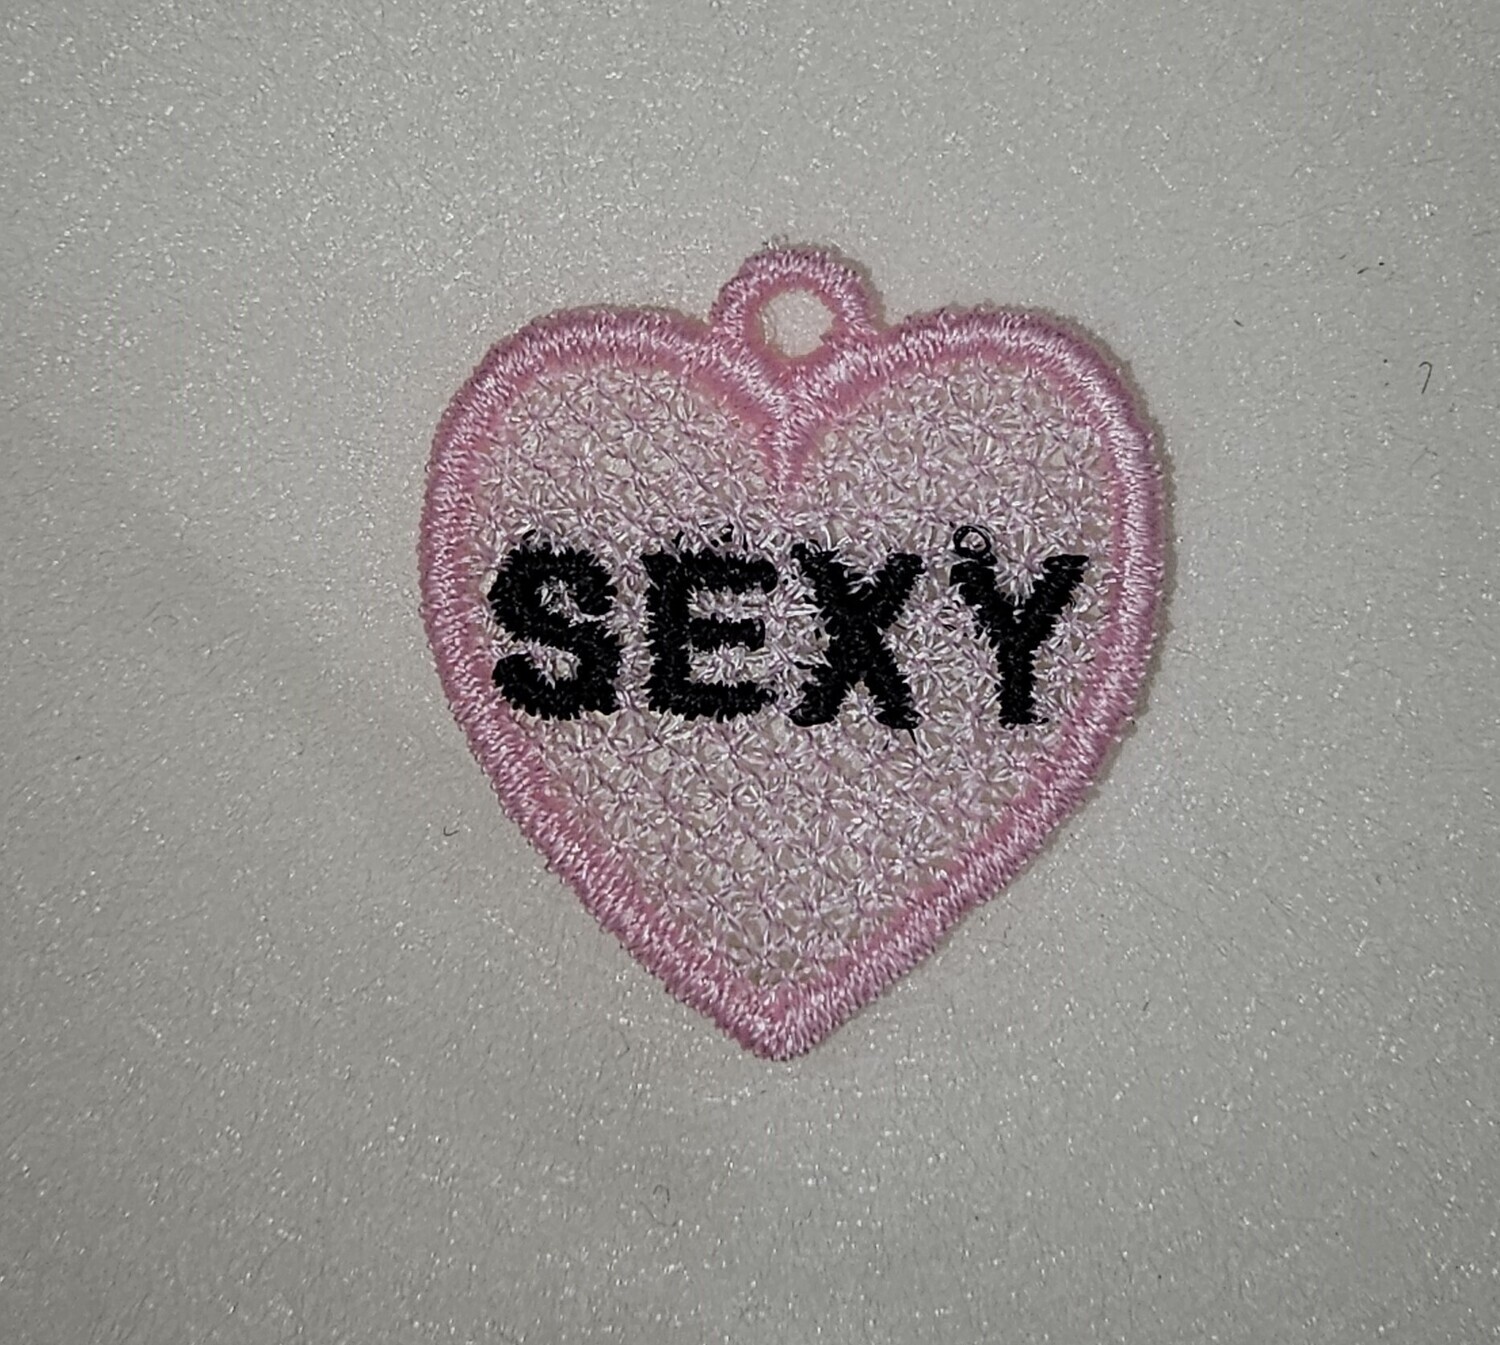 Conversation Hearts NICE set3 Freestanding lace machine embroidery design 8 different designs for earrings, pendants, bracelets and charms